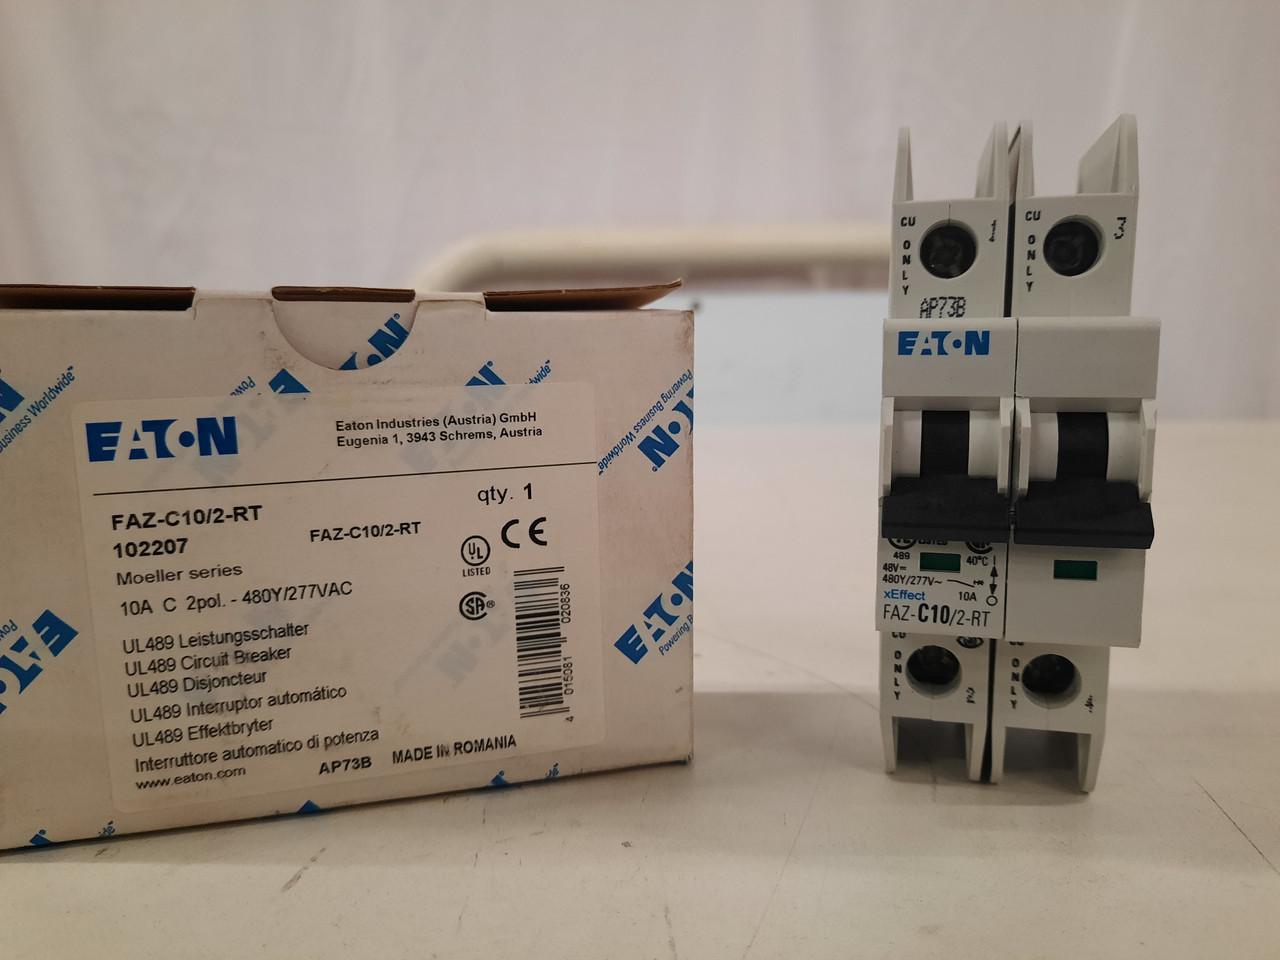 Eaton FAZ-C10/2-RT 277/480 VAC 50/60 Hz, 10 A, 2-Pole, 10/14 kA, 5 to 10 x Rated Current, Ring Tongue Terminal, DIN Rail Mount, Standard Packaging, C-Curve, Current Limiting, Thermal Magnetic